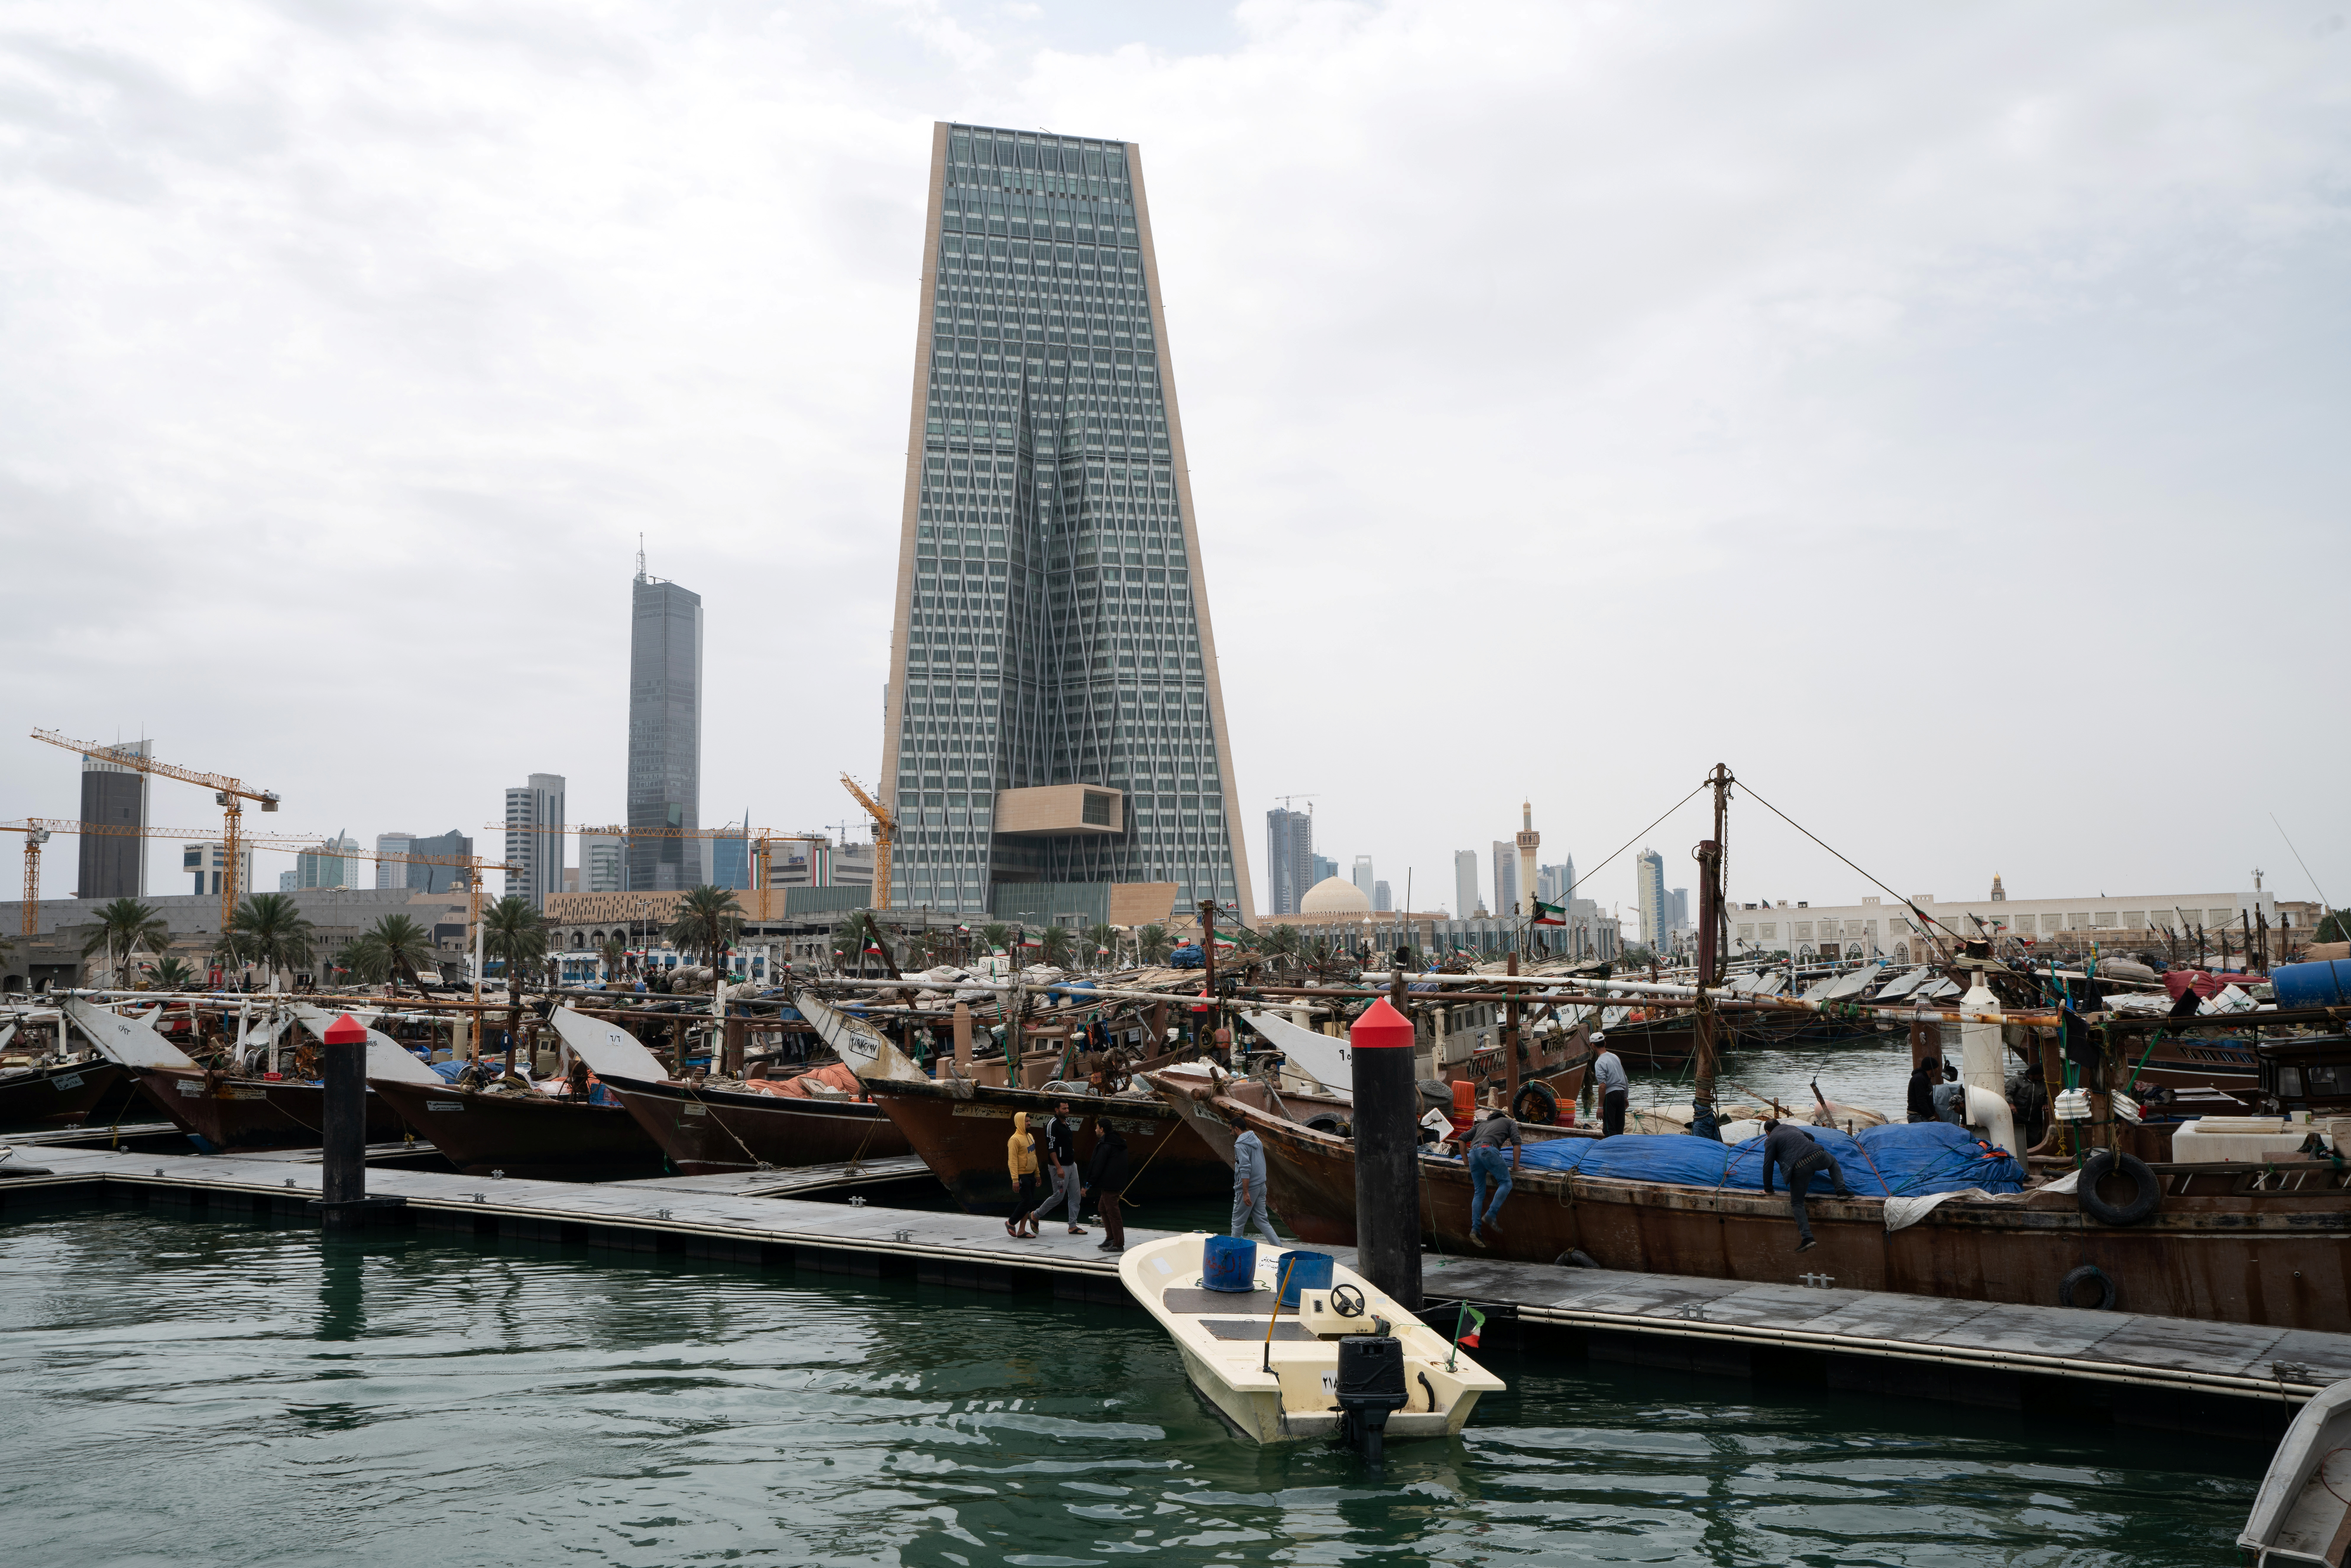 The Kuwait Central Bank towers over the traditional Dhow harbor in Kuwait City